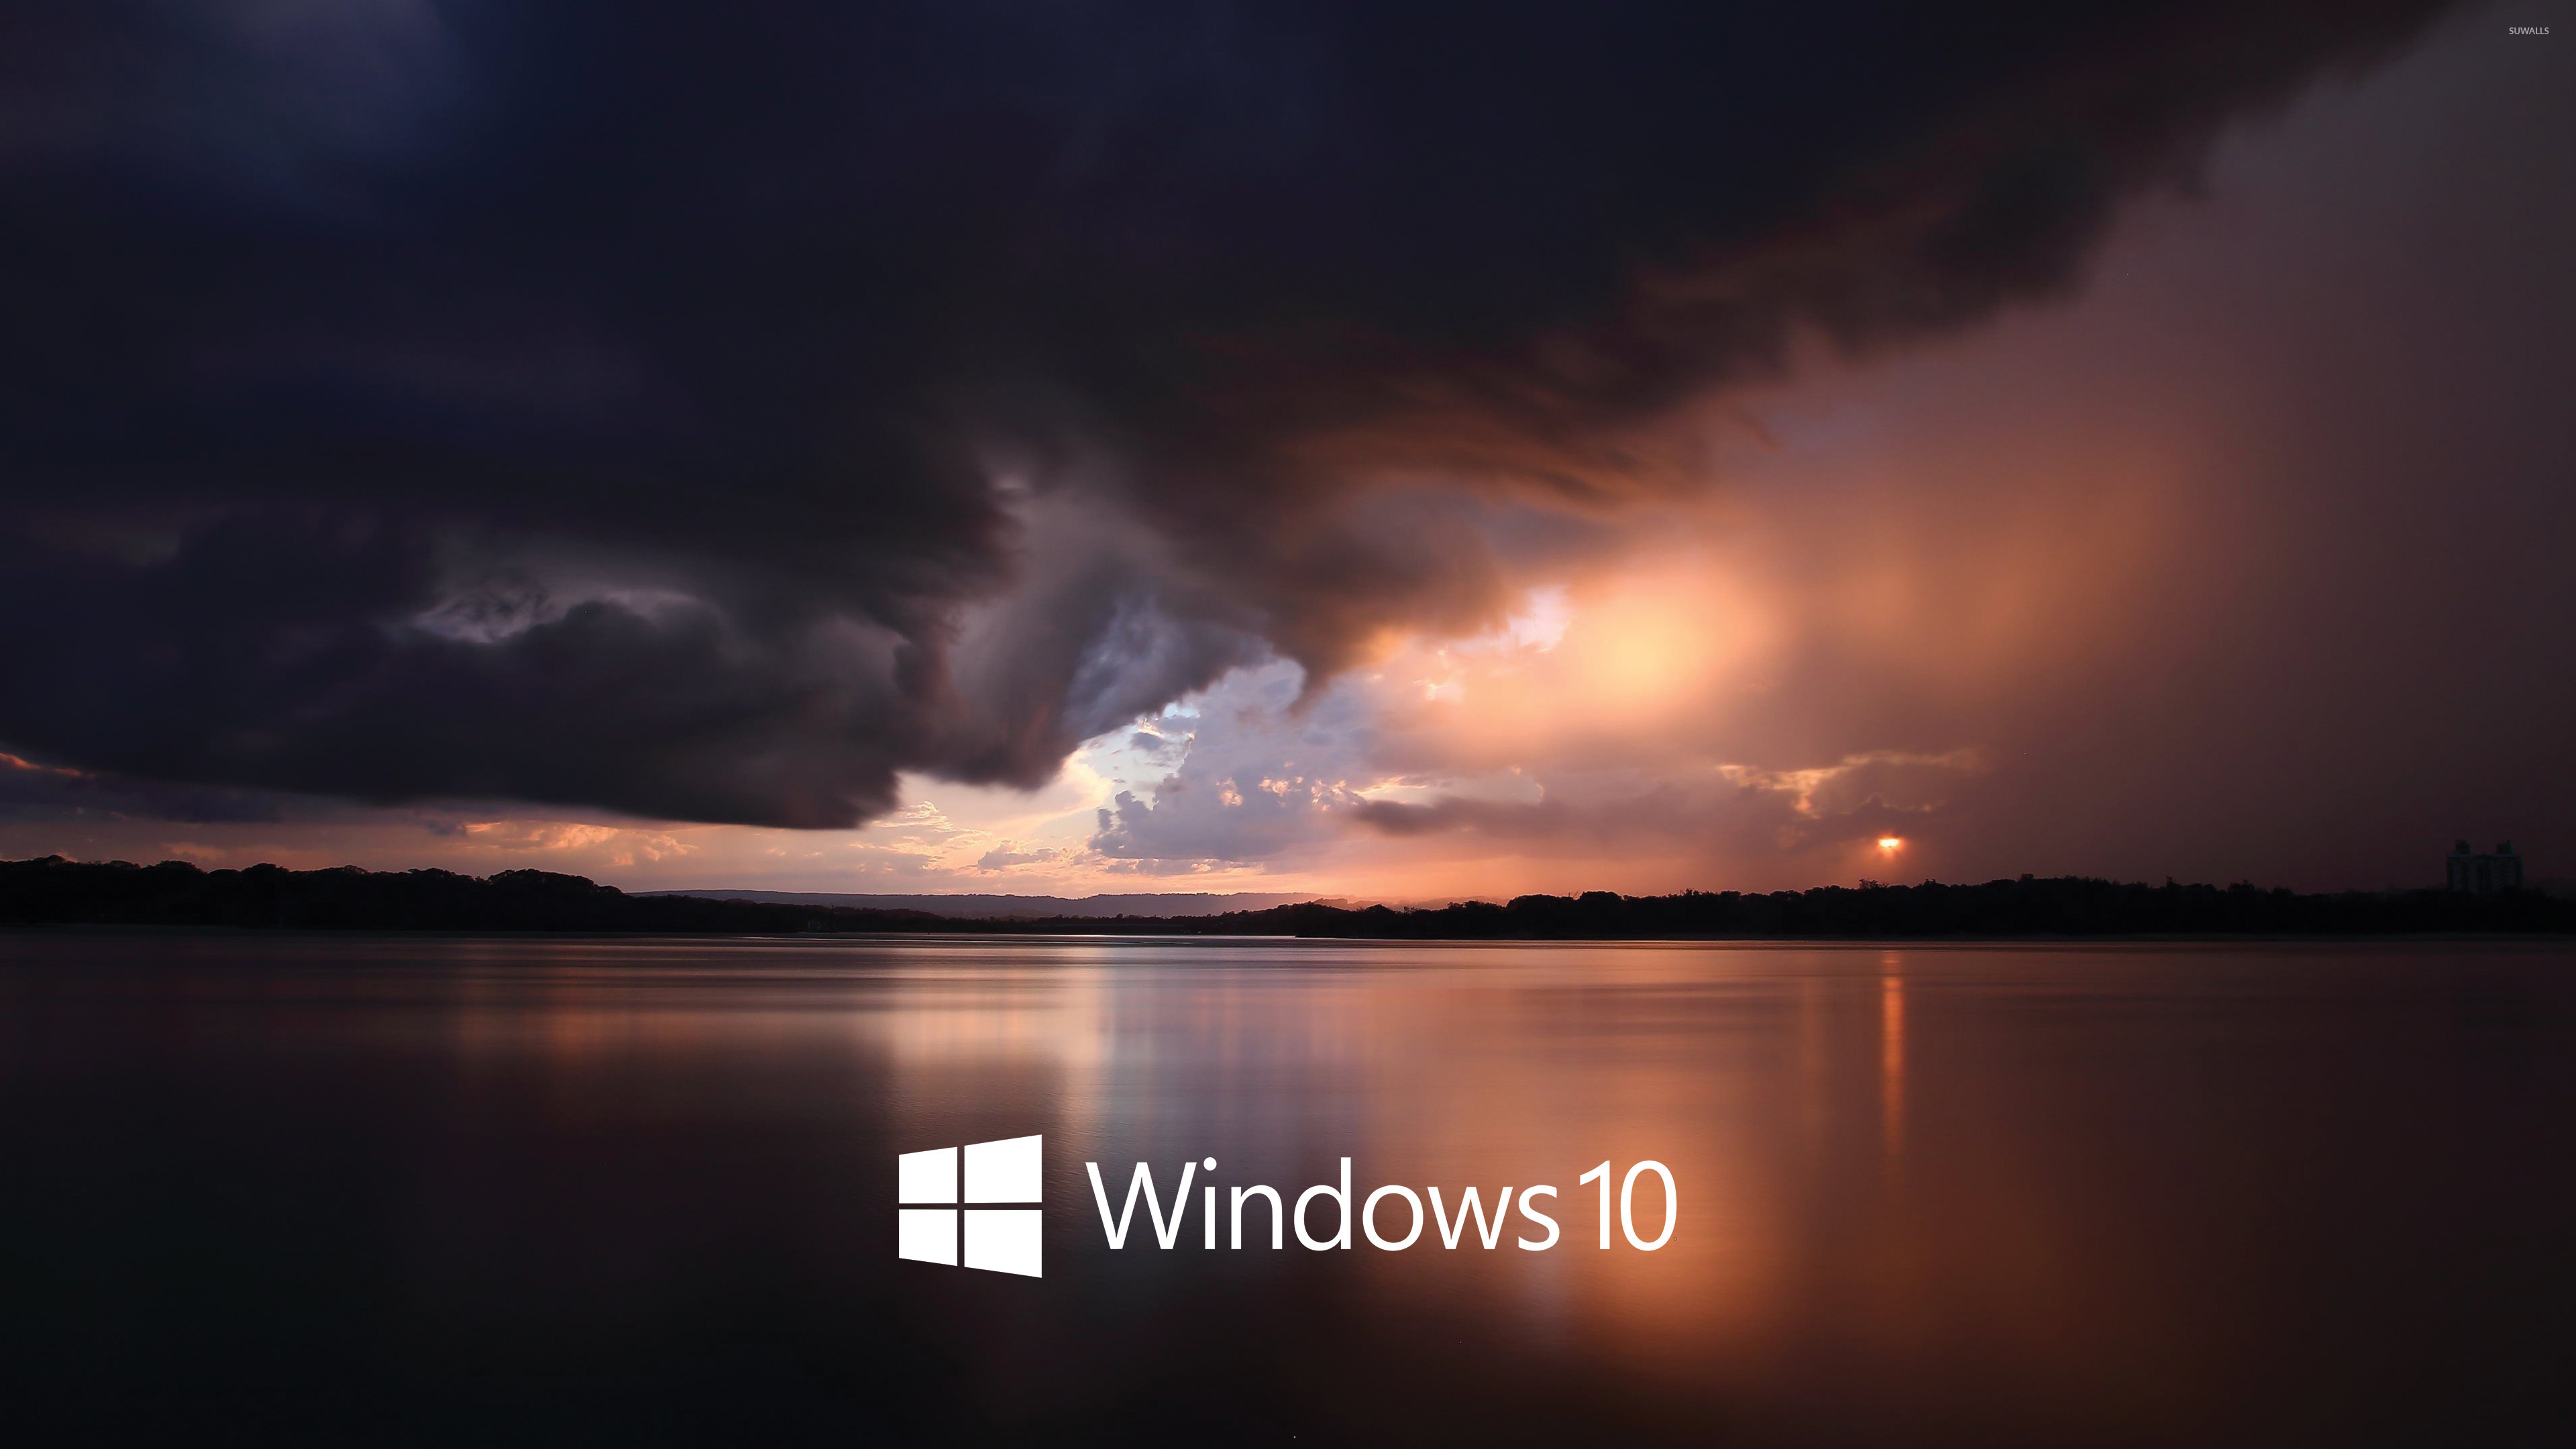 Windows 10 white text logo over the stormy sea wallpaper   Computer 1366x768